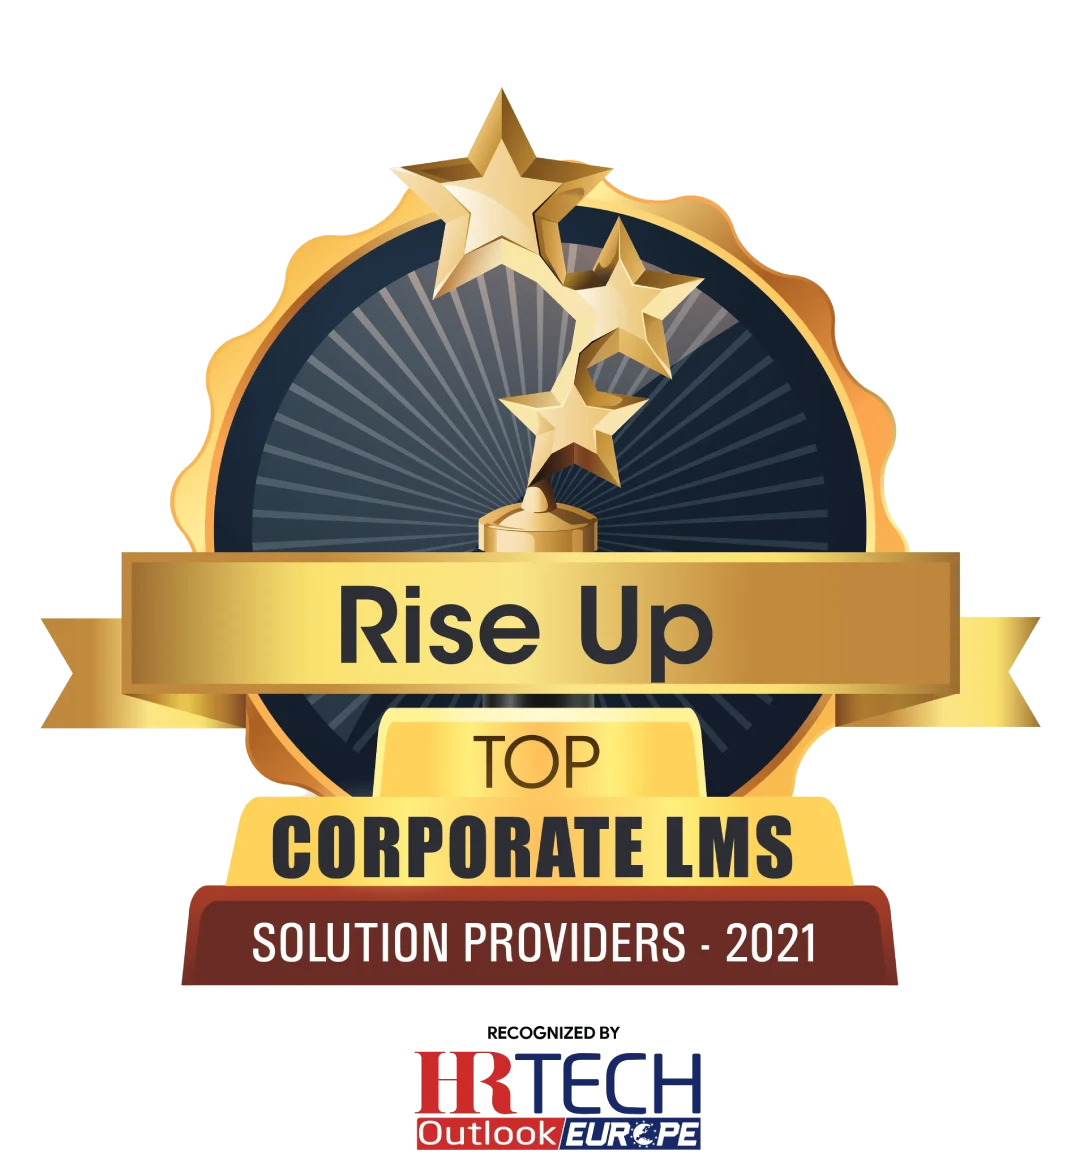 Rise Up has been awarded Top Corporate LMS in 2021 by HRTech Outlook